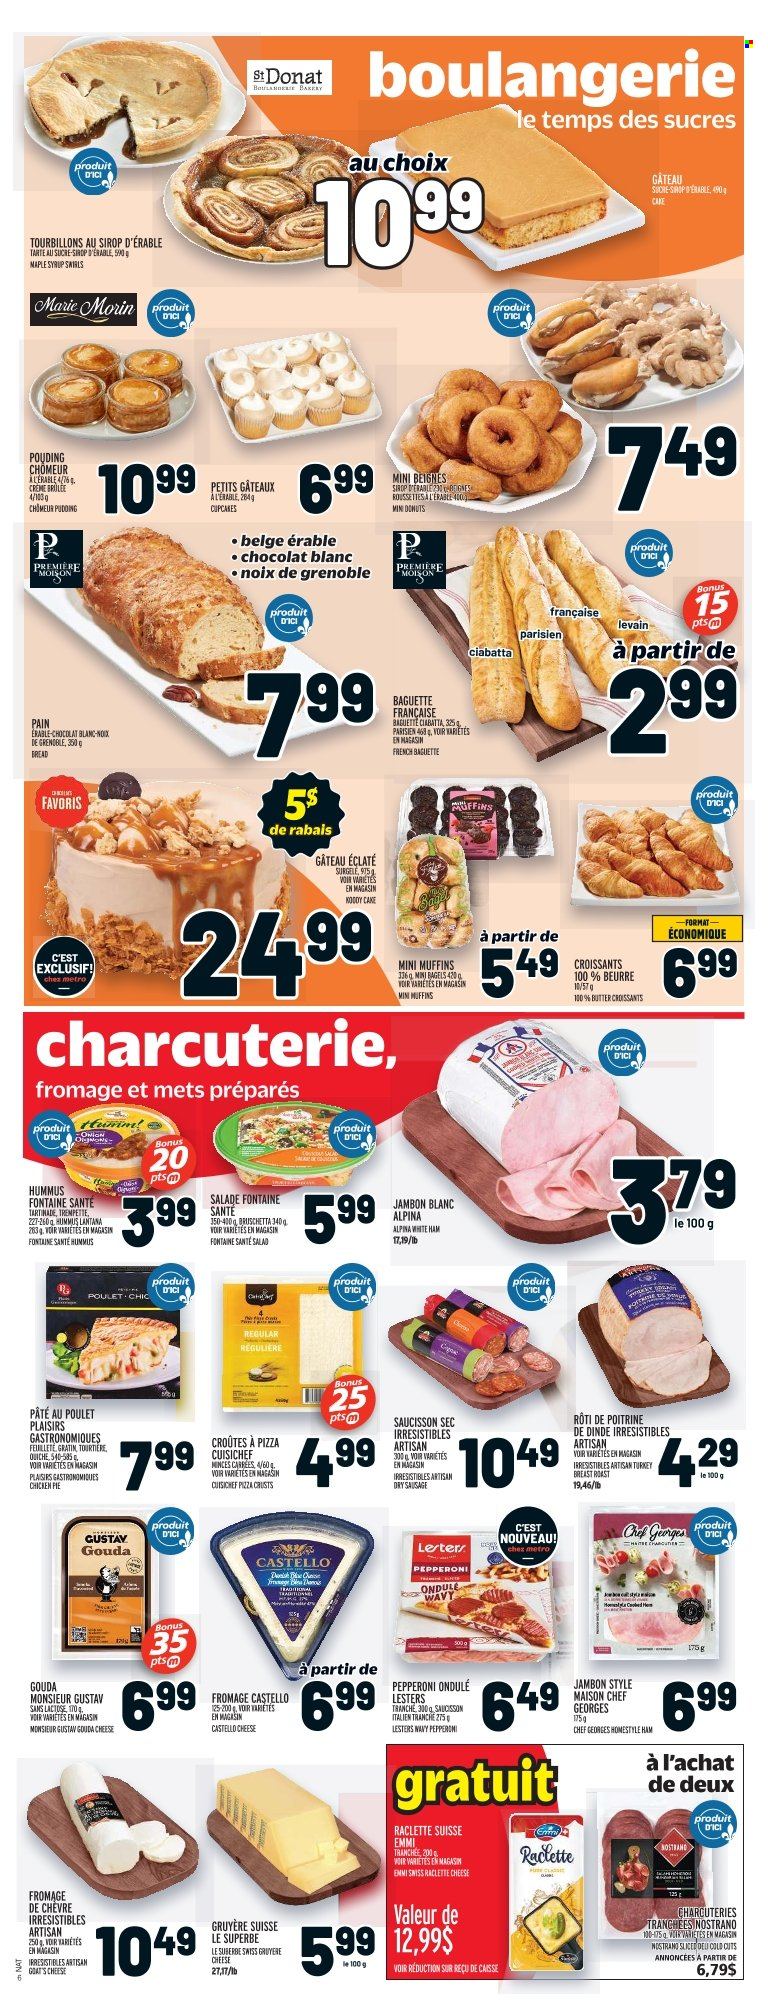 thumbnail - Metro Flyer - February 09, 2023 - February 15, 2023 - Sales products - bagels, bread, cake, pie, croissant, cupcake, donut, muffin, salad, pizza, bruschetta, ham, sausage, pepperoni, hummus, gouda, Gruyere, raclette cheese, pudding, quiche, maple syrup, syrup, turkey, PREMIERE, baguette, ciabatta. Page 8.